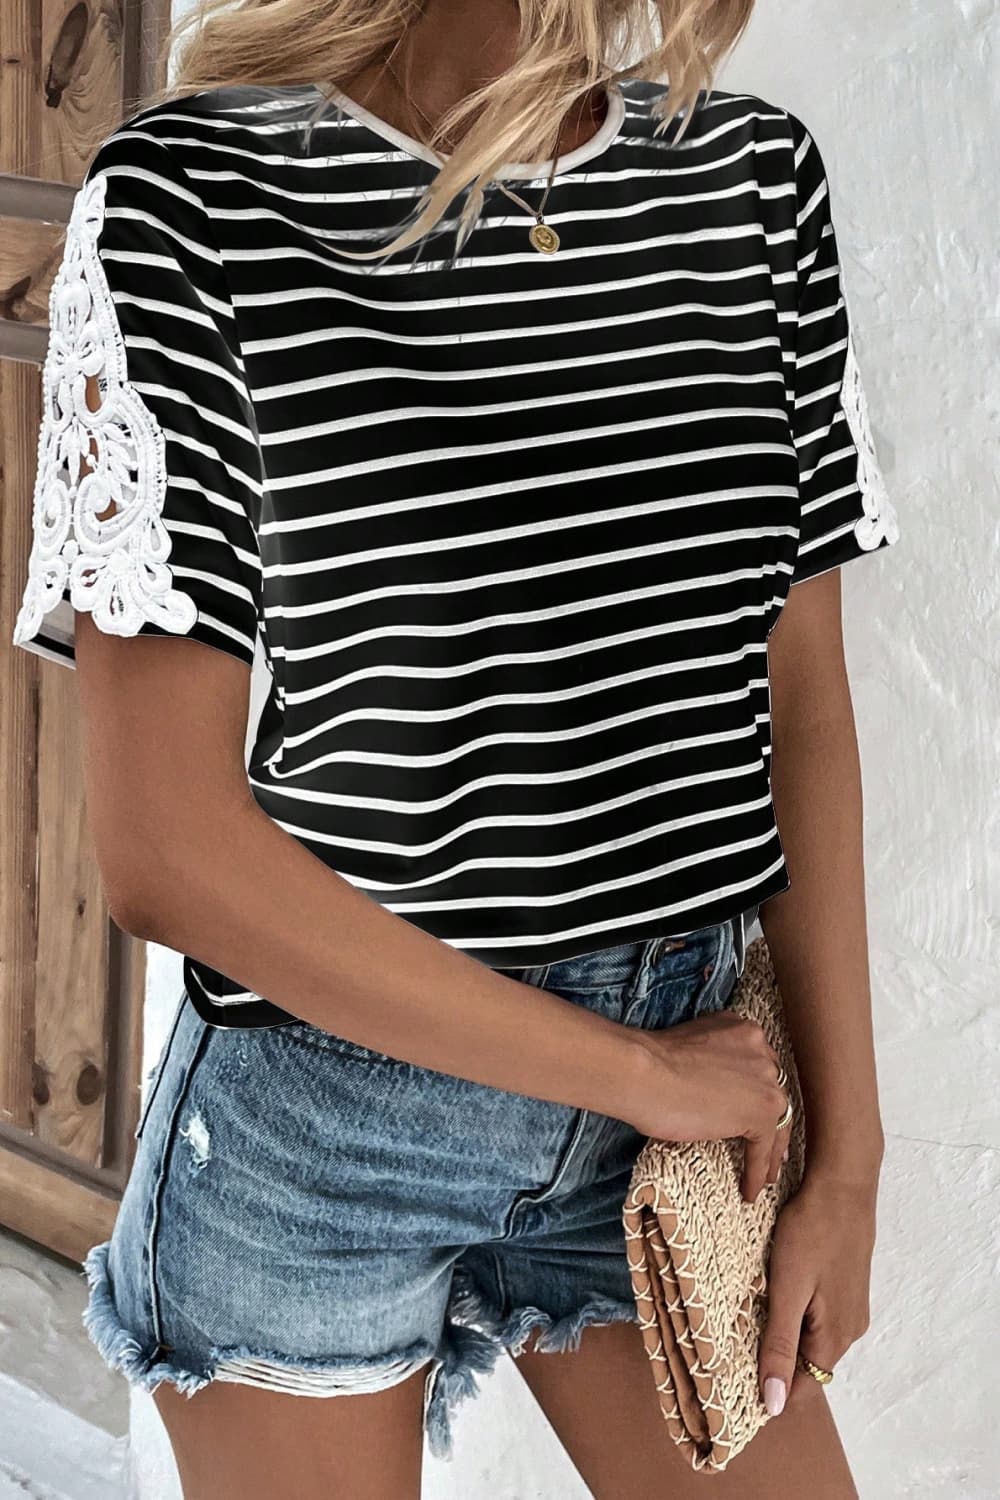 Striped Spliced Lace Round Neck Tee